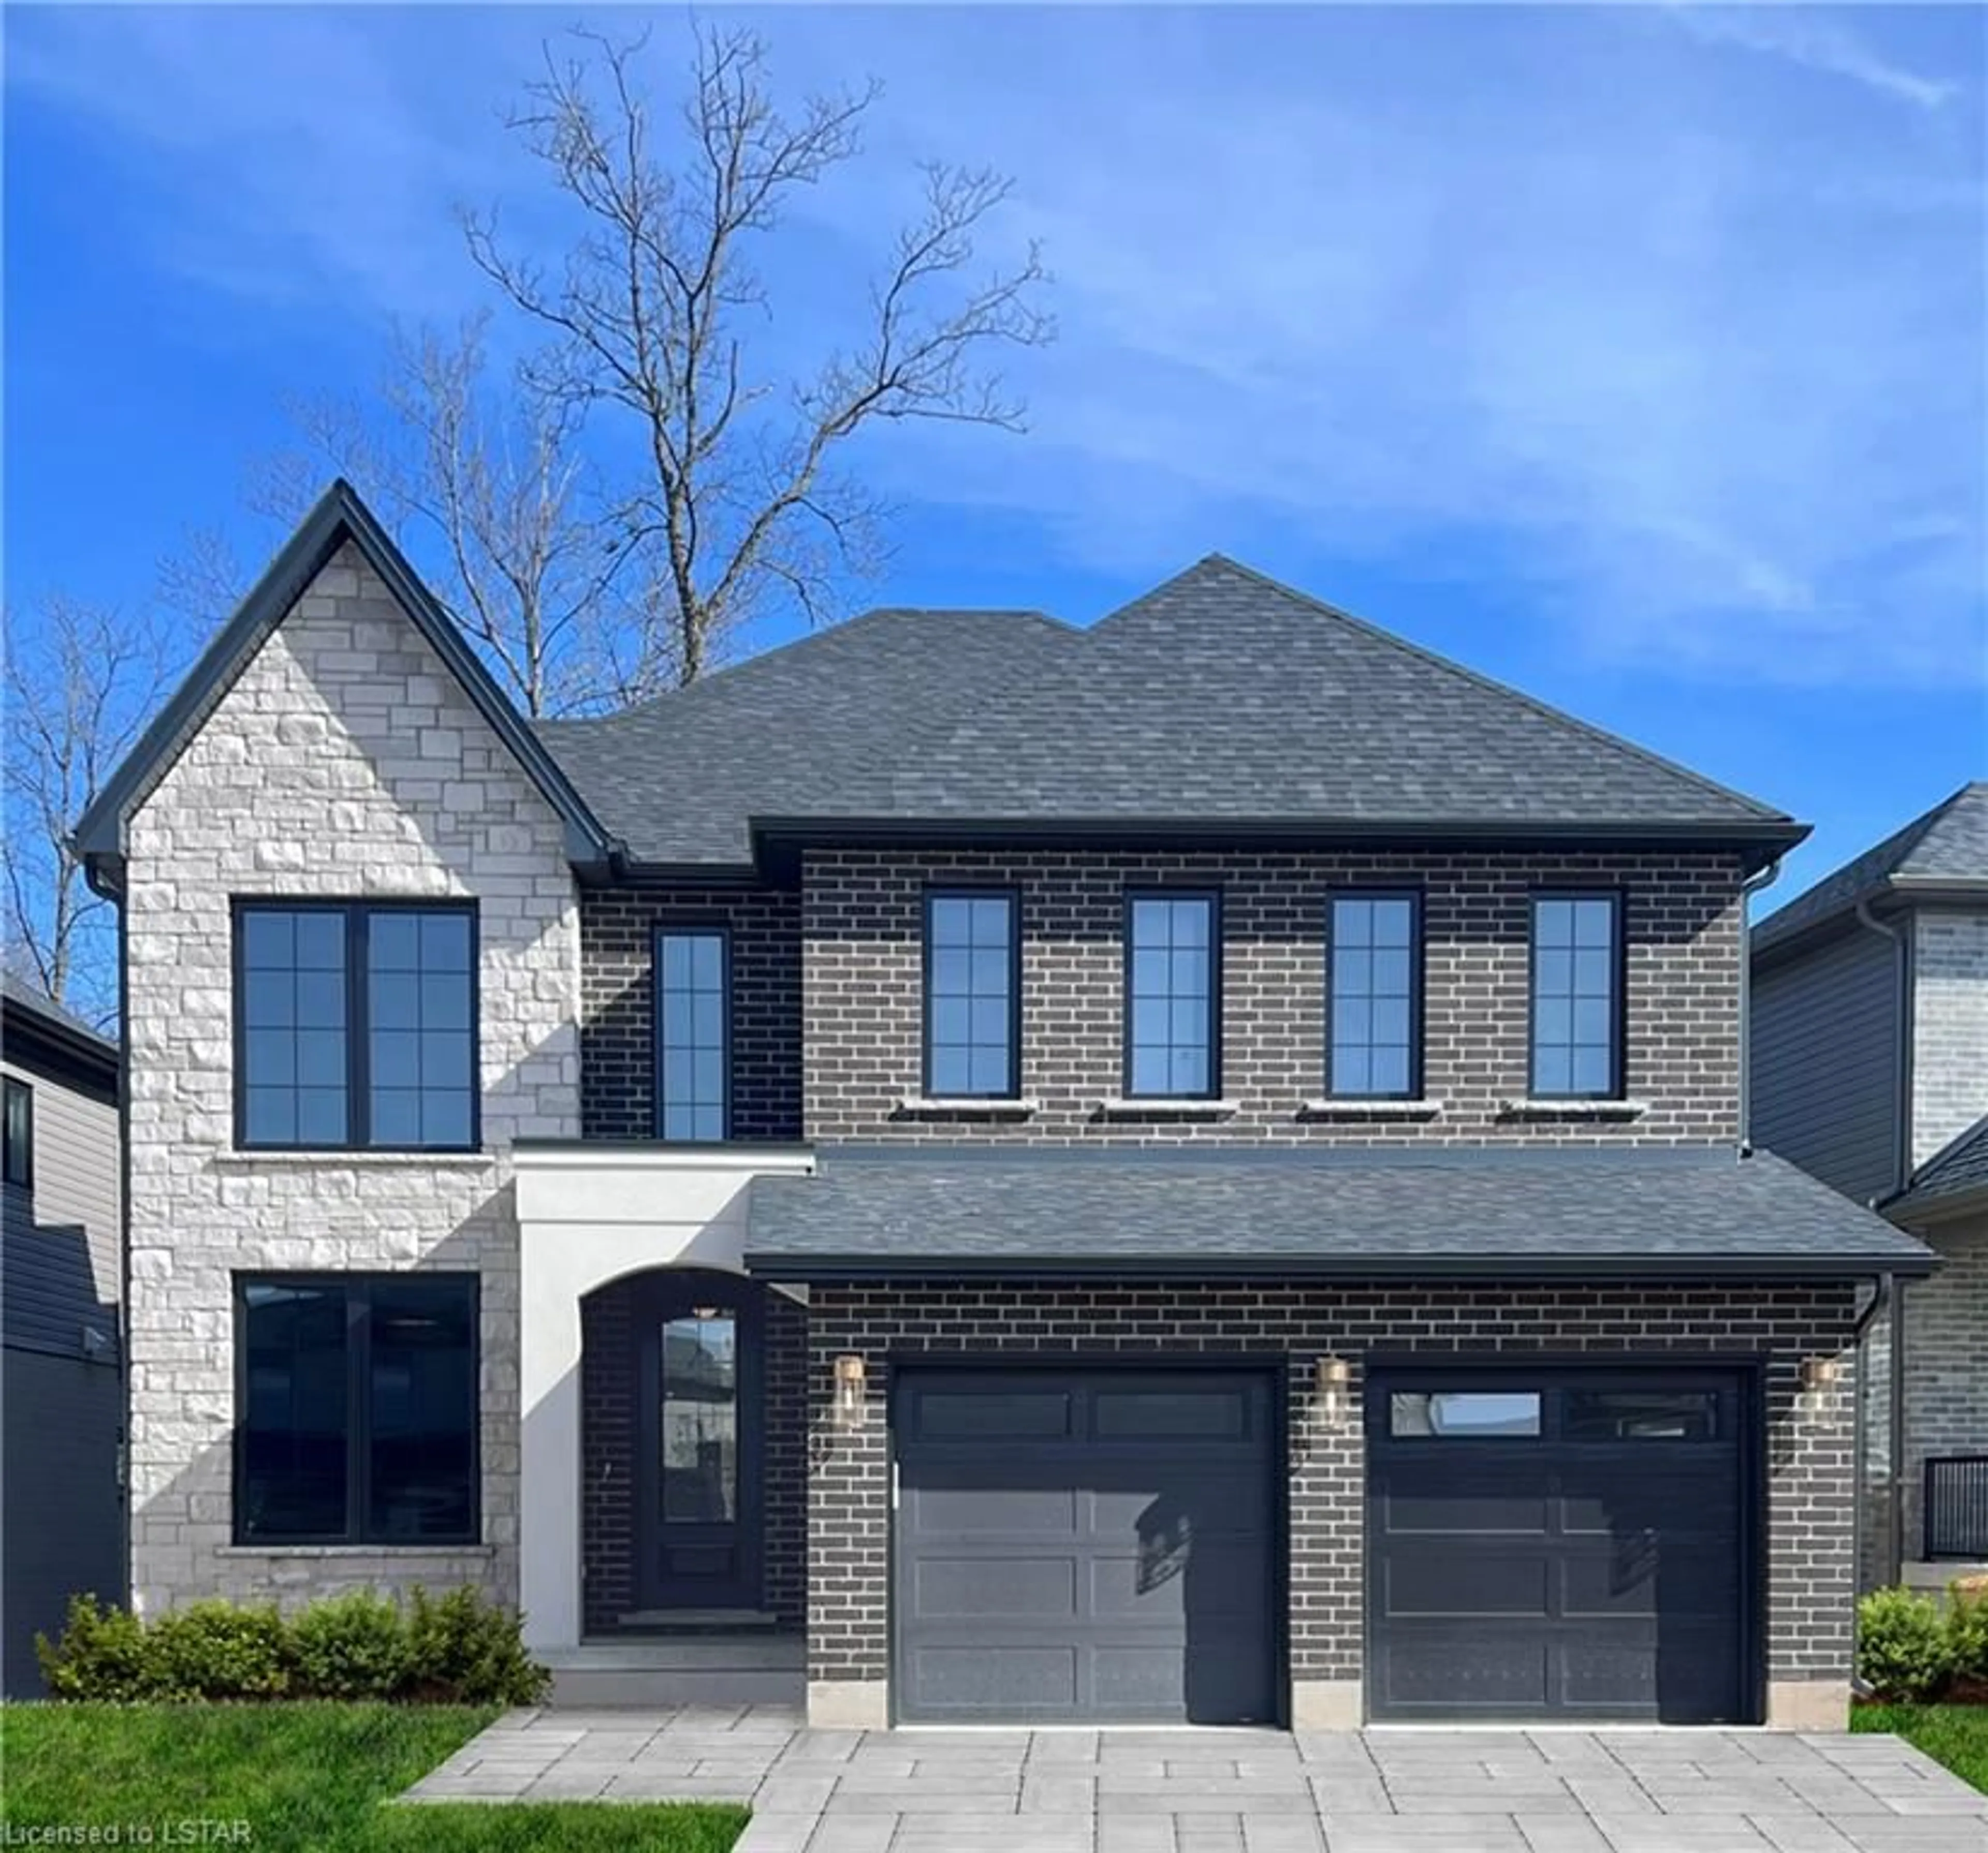 Home with brick exterior material for 1096 Riverbend Rd, London Ontario N6K 0J1